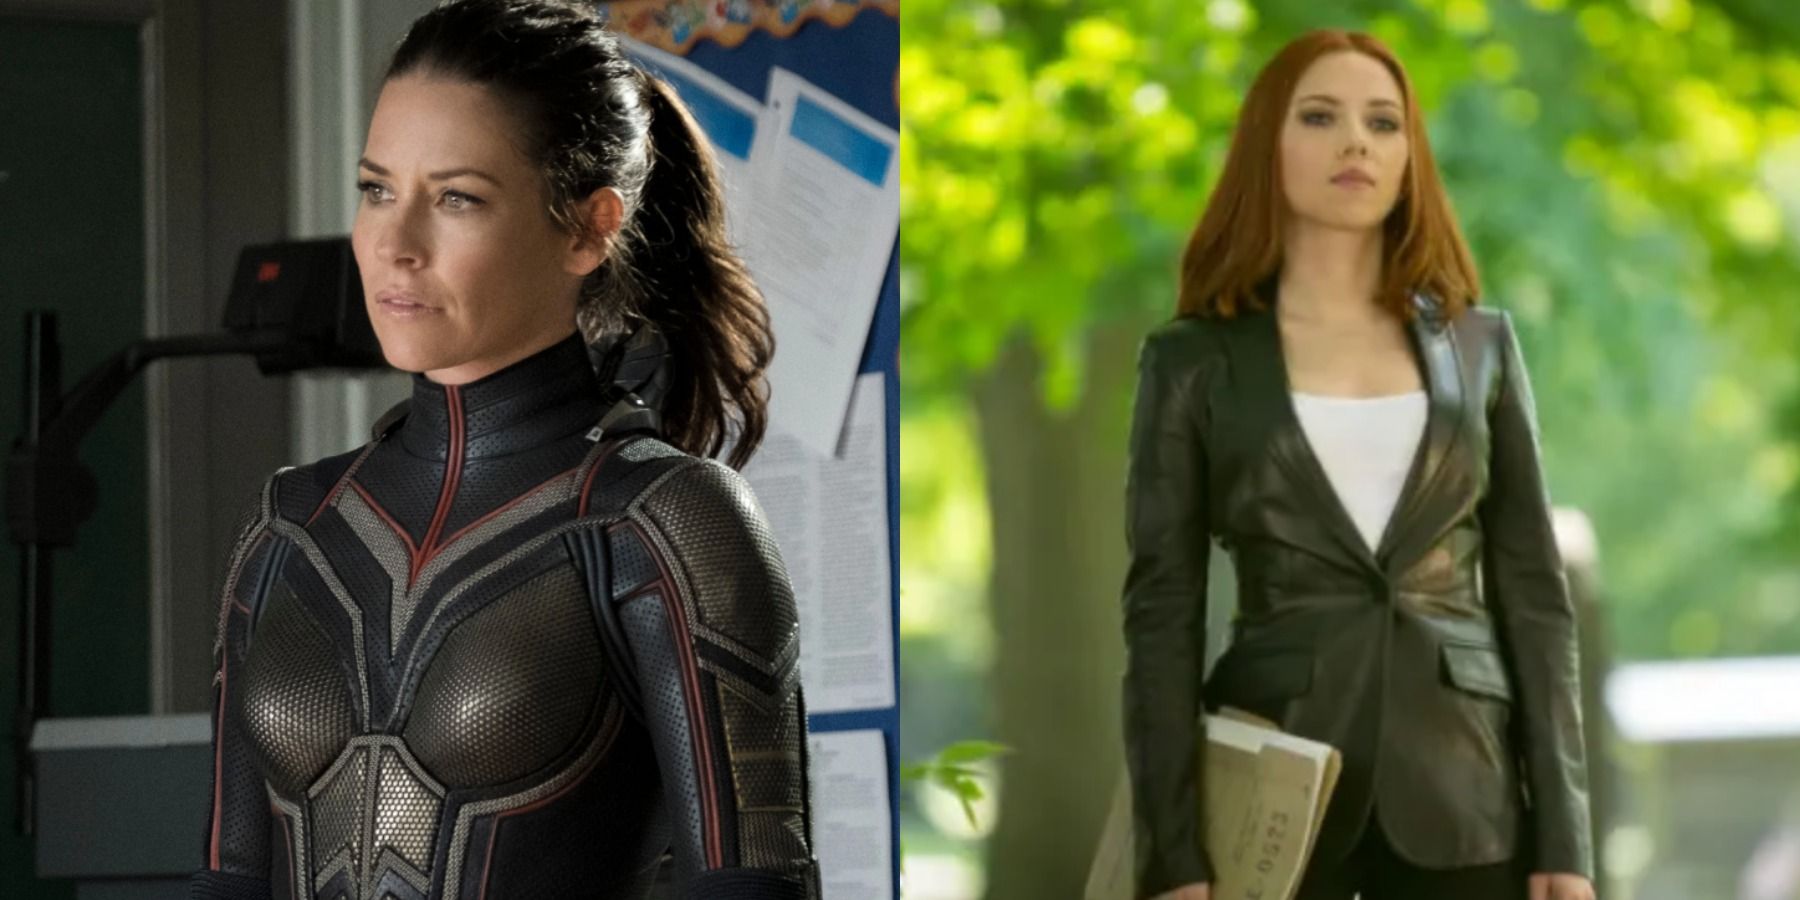 A split image depicts Hope Van Dyne and Natasha Romanoff in the Marvel Cinematic Universe